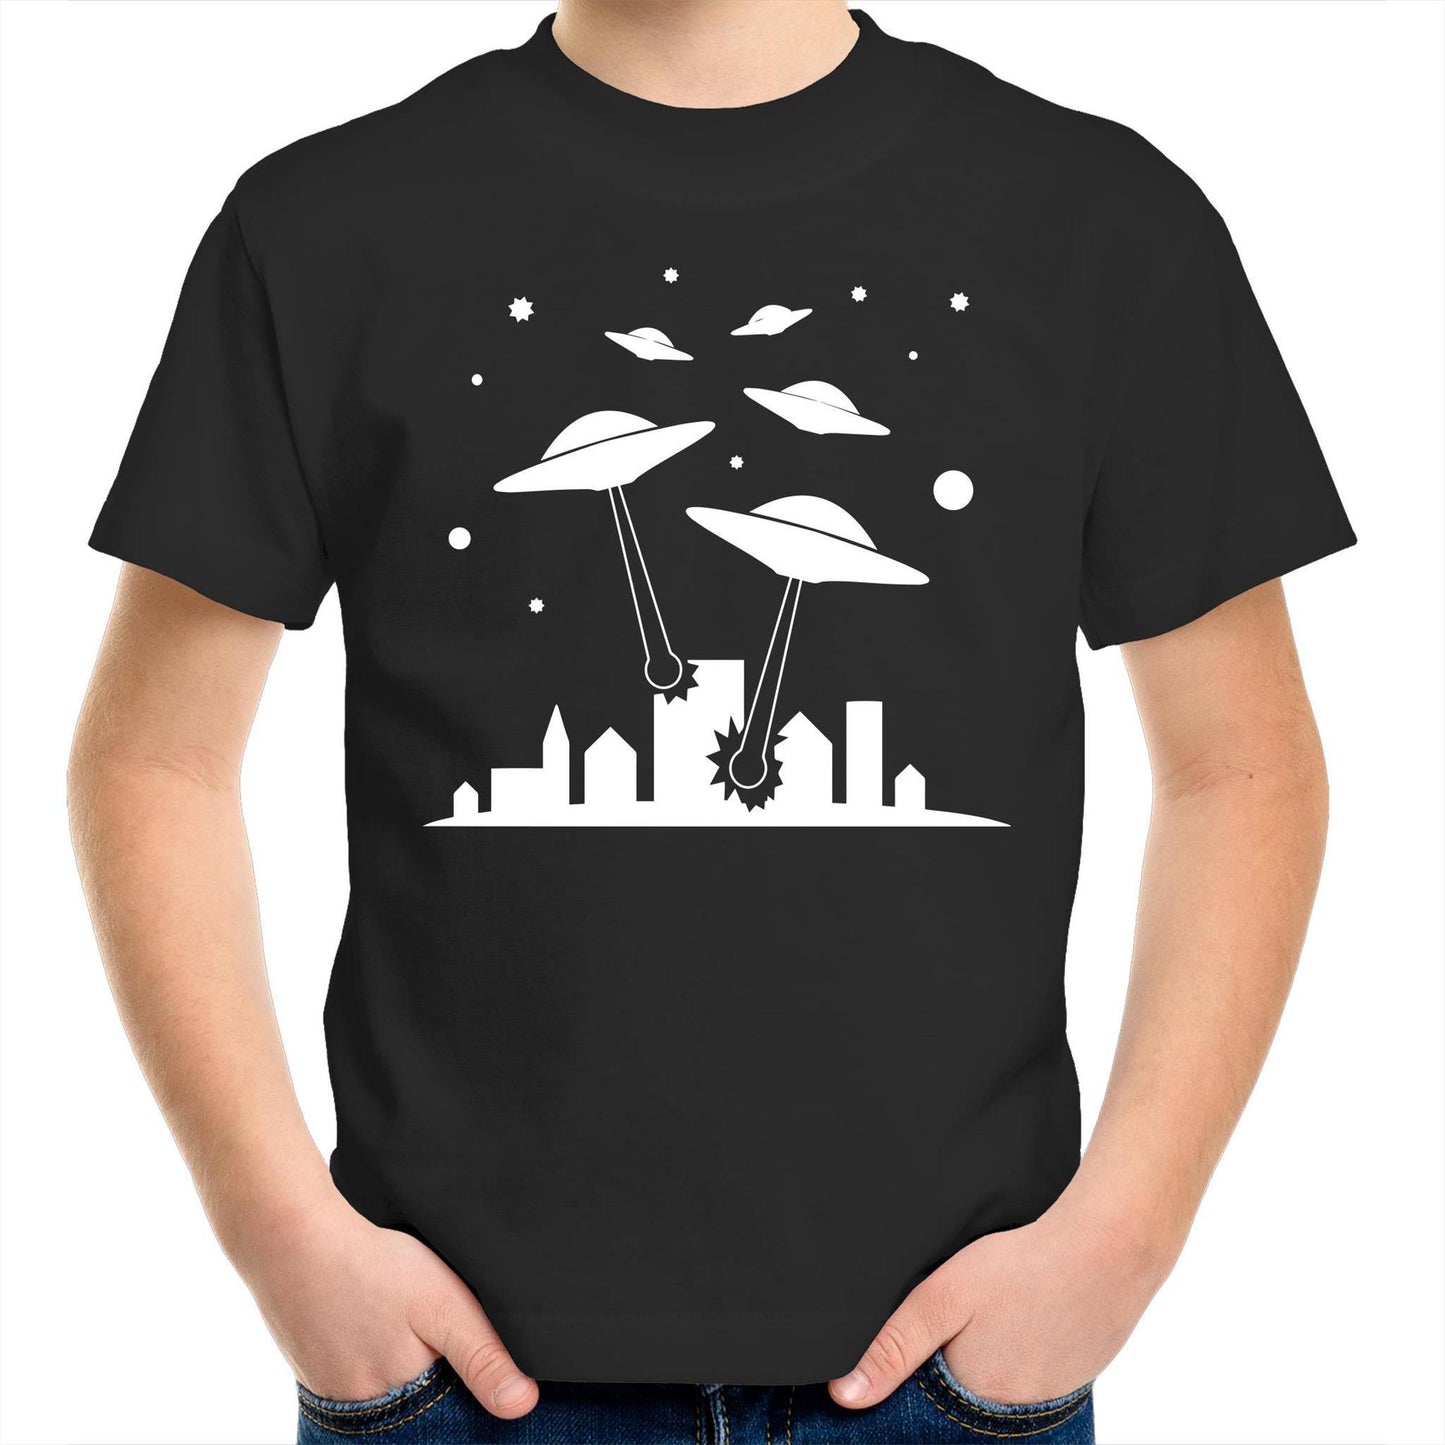 Space Invasion - Kids Youth Crew T-Shirt Black Kids Youth T-shirt